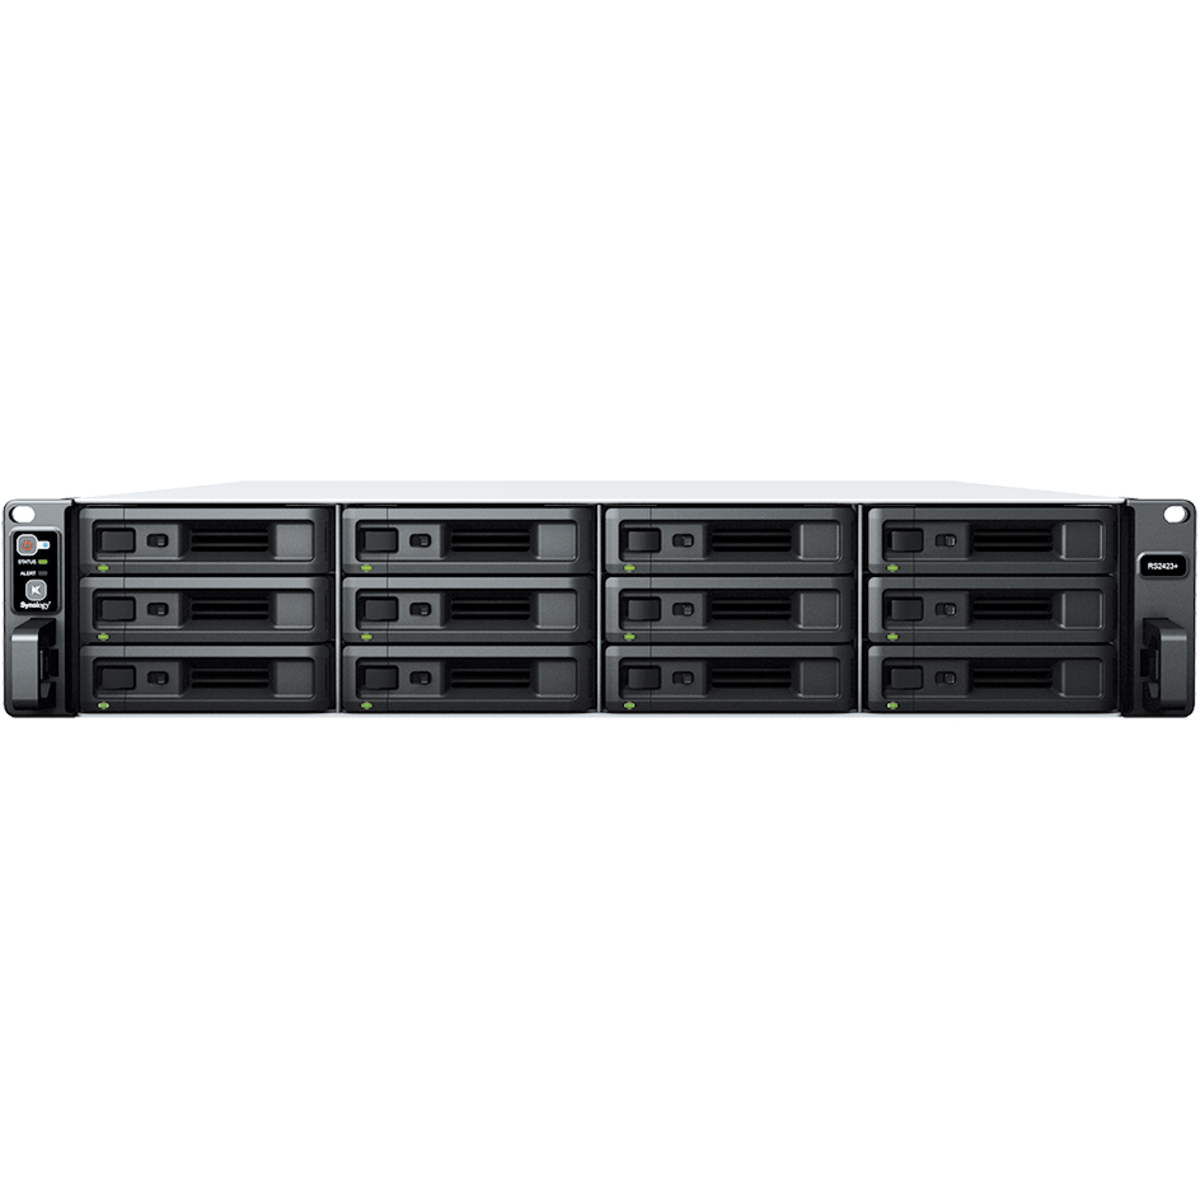 buy $8543 Synology RackStation RS2423+ 96tb RackMount NAS - Network Attached Storage Device 12x8000gb Samsung 870 QVO MZ-77Q8T0 2.5 560/530MB/s SATA 6Gb/s SSD CONSUMER Class Drives Installed - Burn-In Tested - nas headquarters buy network attached storage server device das new raid-5 free shipping usa RackStation RS2423+